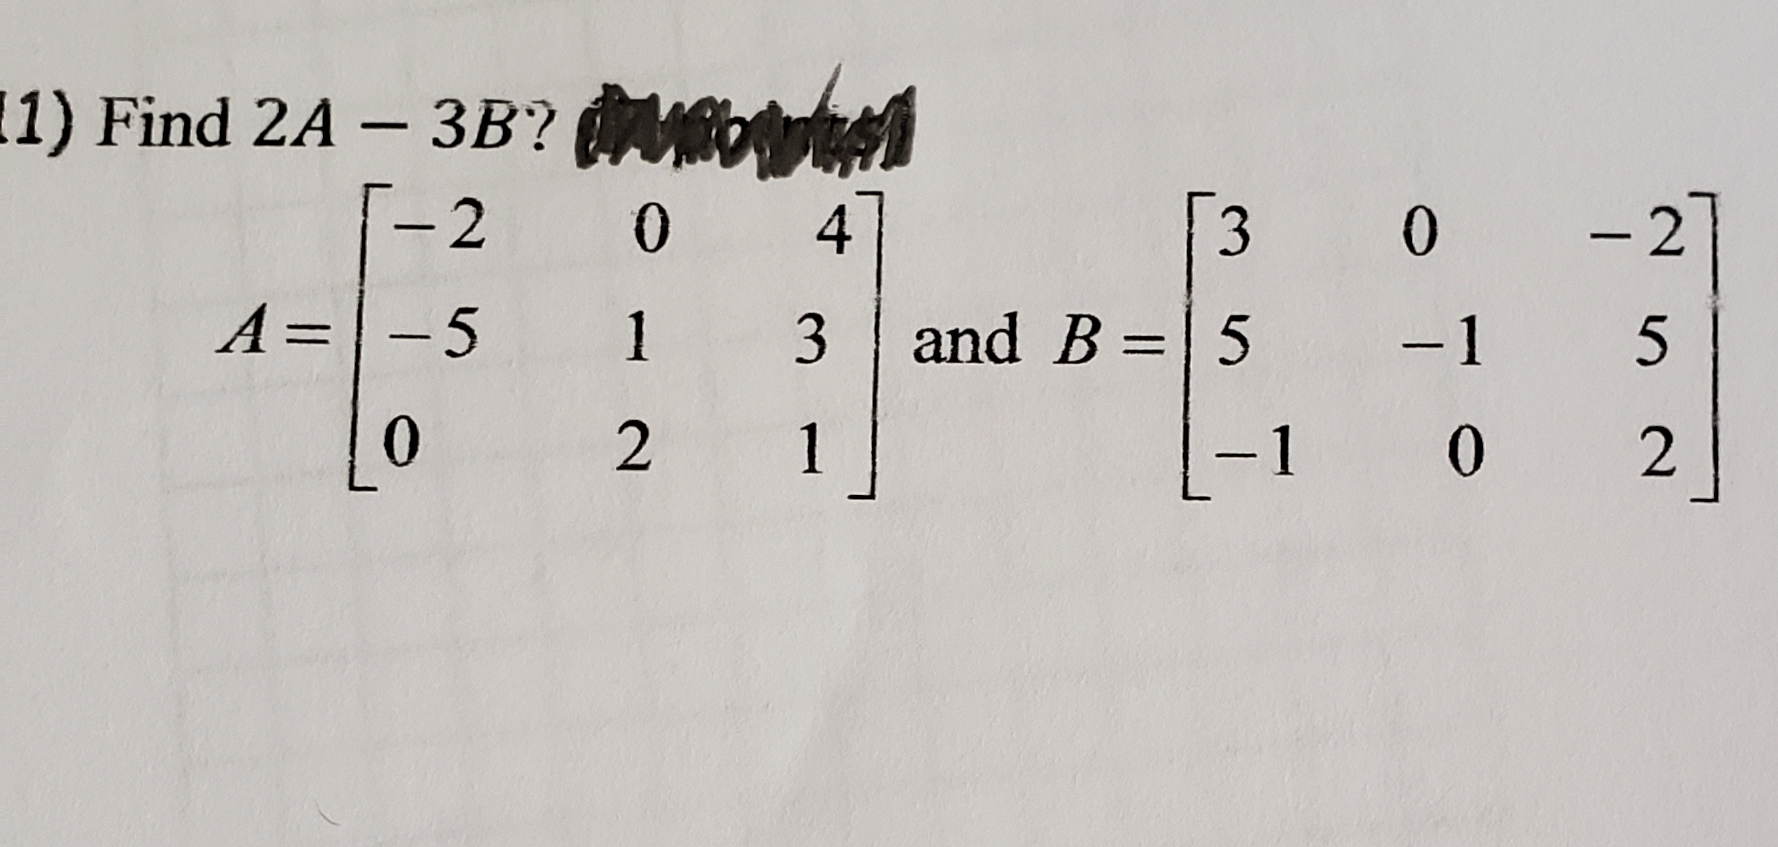 Find 2A – 3B? i
2A - 3B?
-2 0 4
[3
-2]
A=-5
and B=5
3
-1
1
1-
2.
2.
